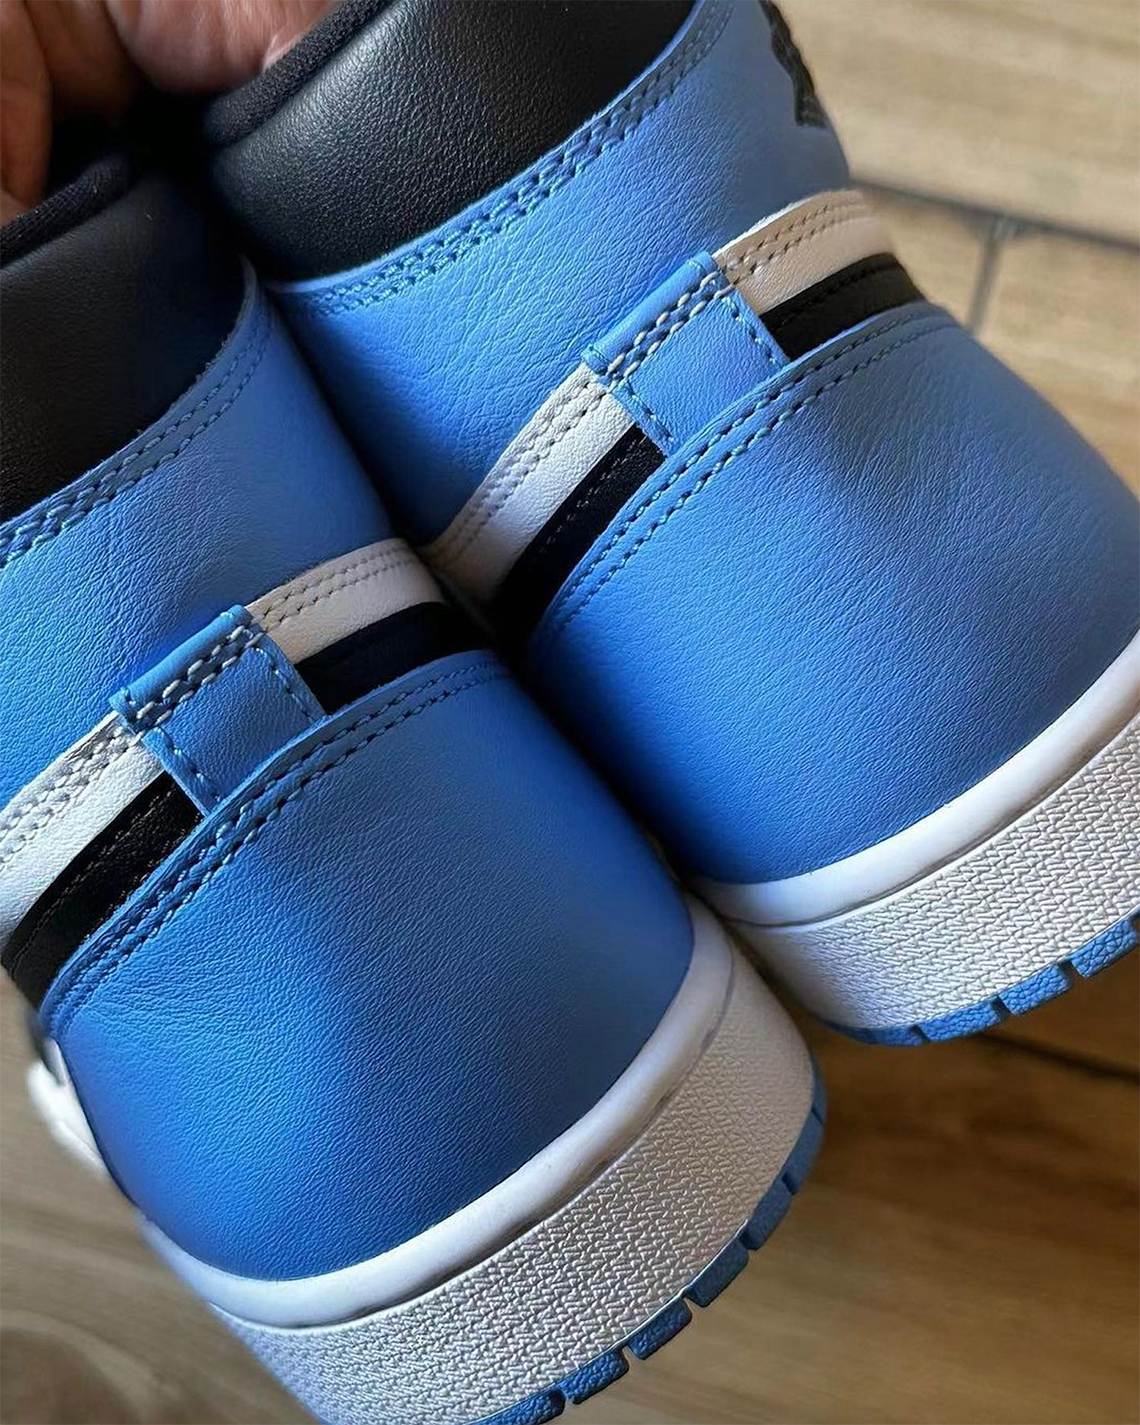 Why Jordan Brand Created an Easy-Entry Shoe for Kids